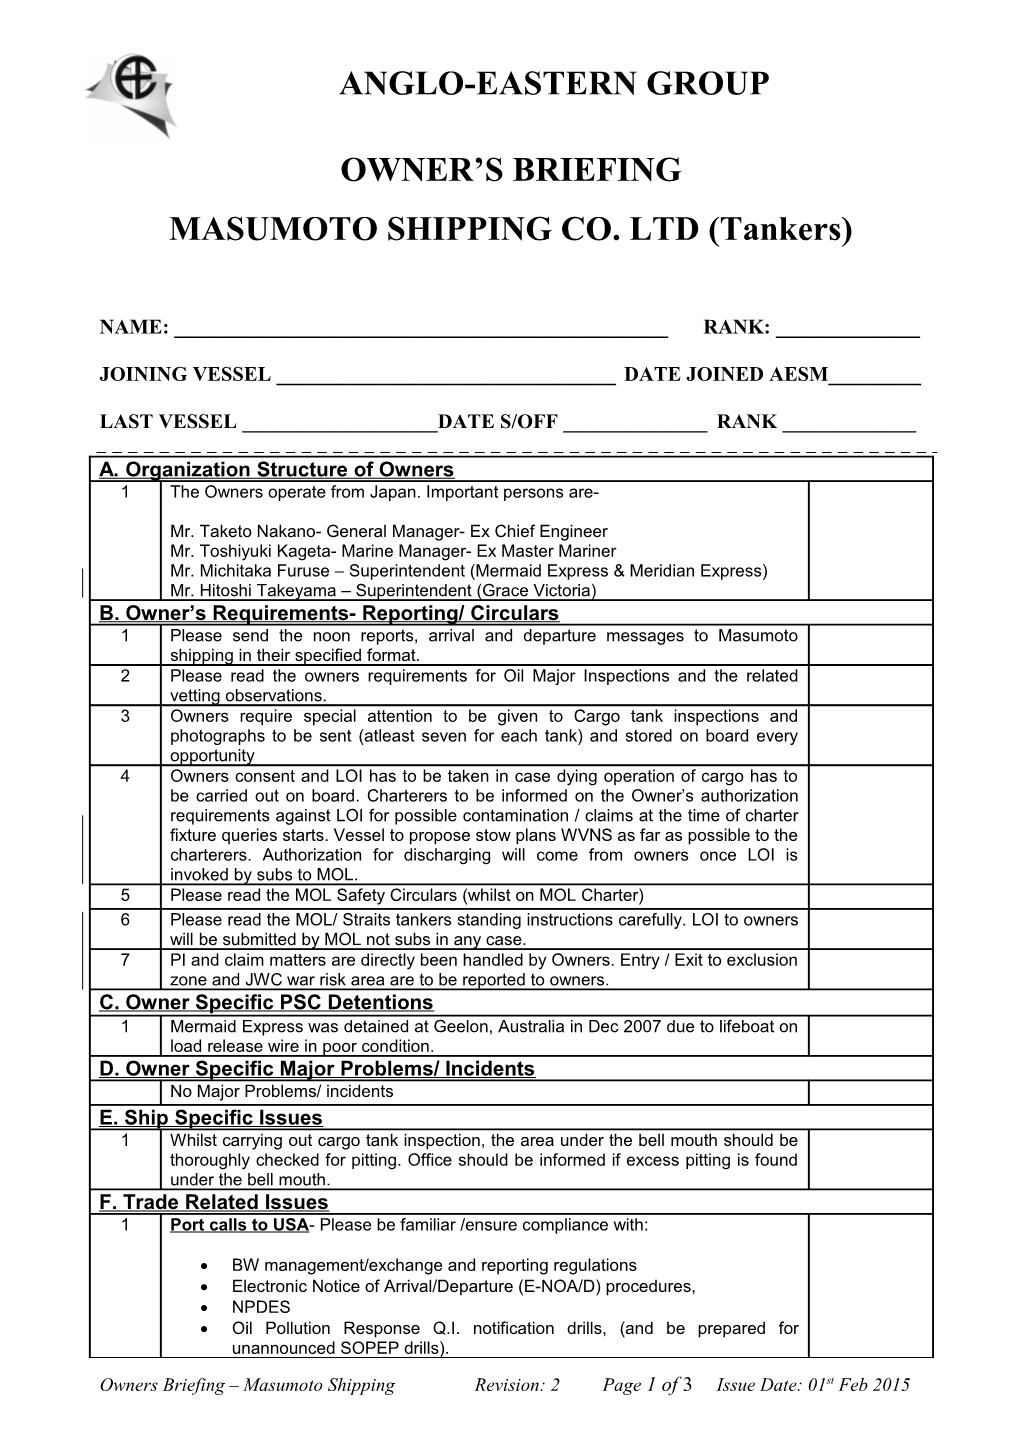 Owners Briefing- Masumoto Shipping (AE- Singapore)